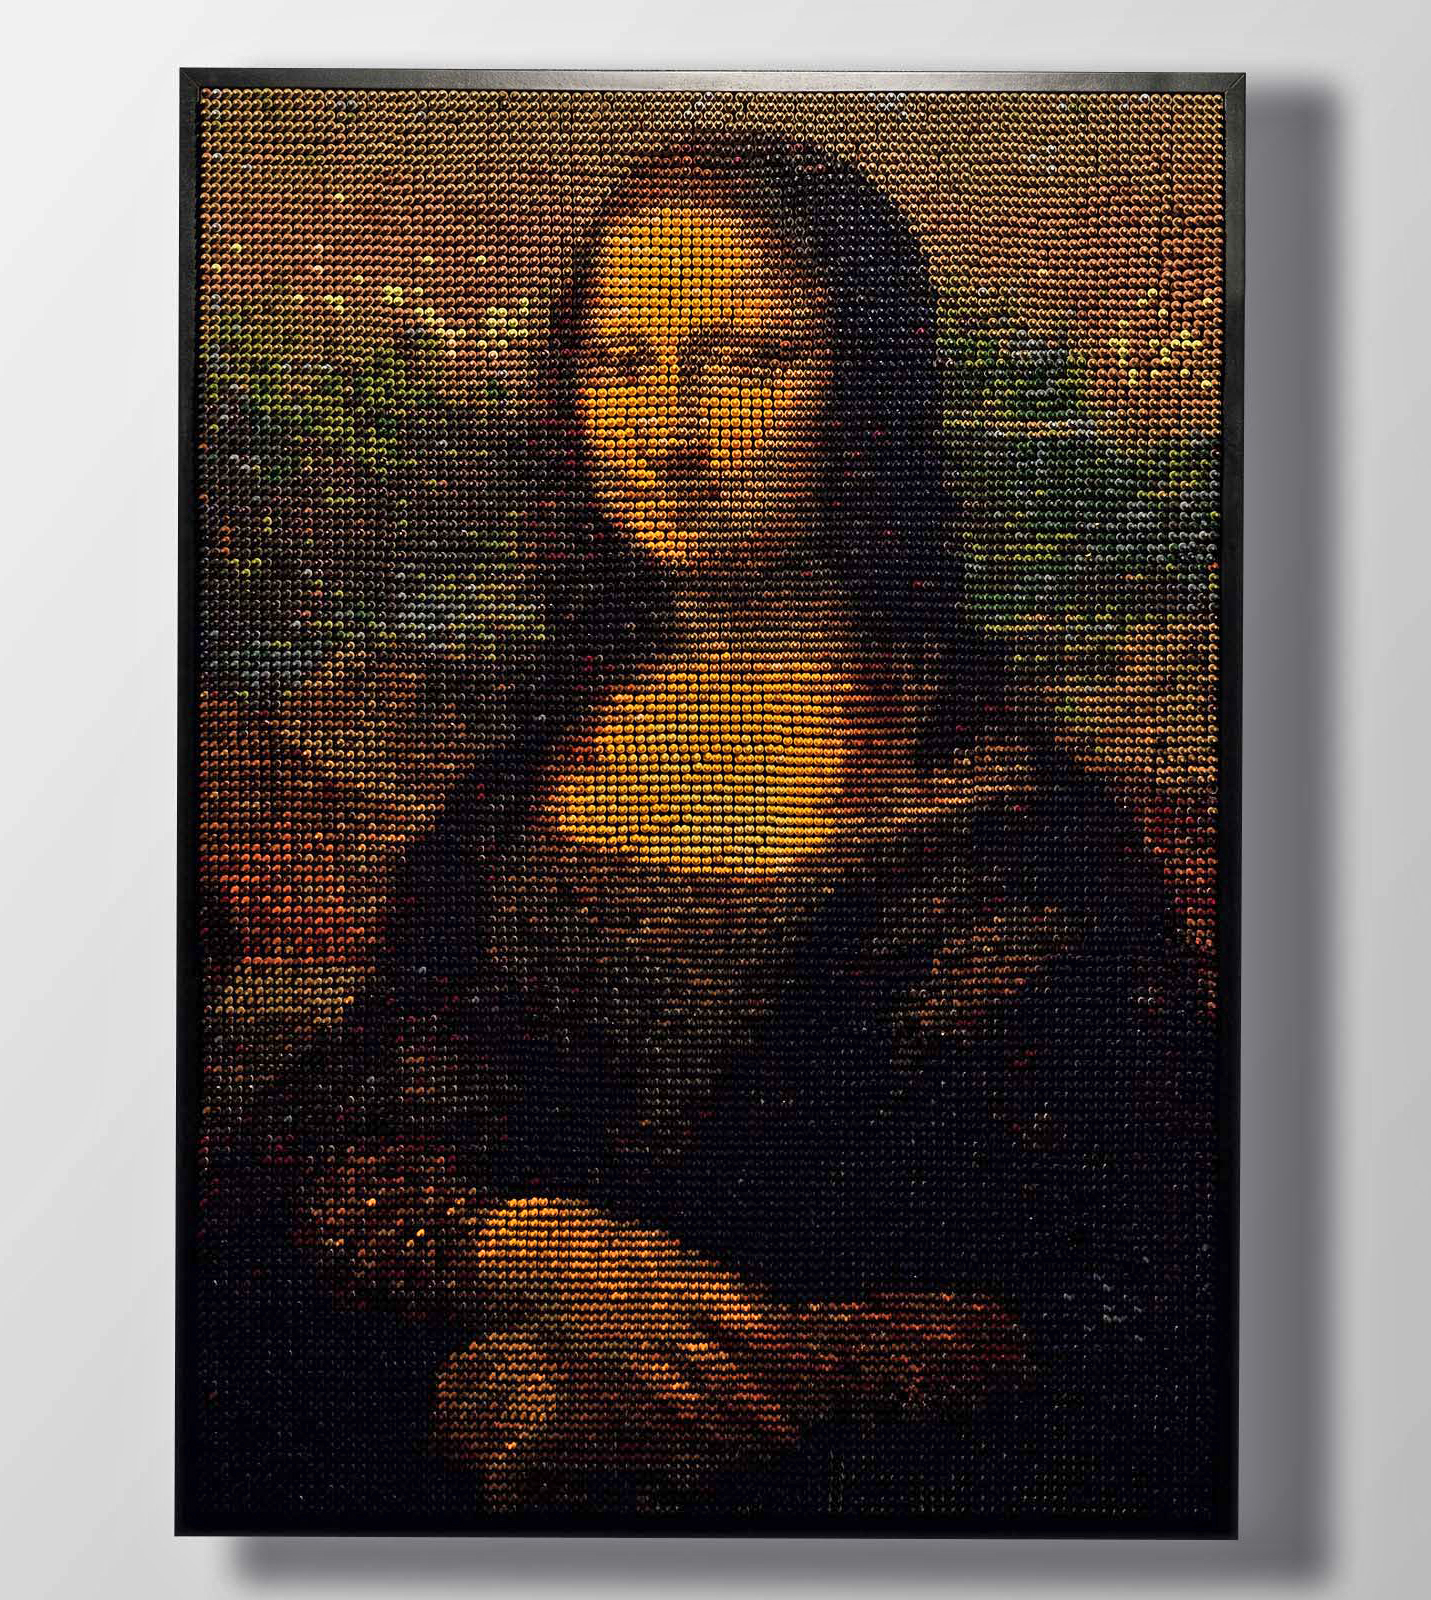 This Website Will Turn Your Photos Into Crayon Mosaic Masterpieces